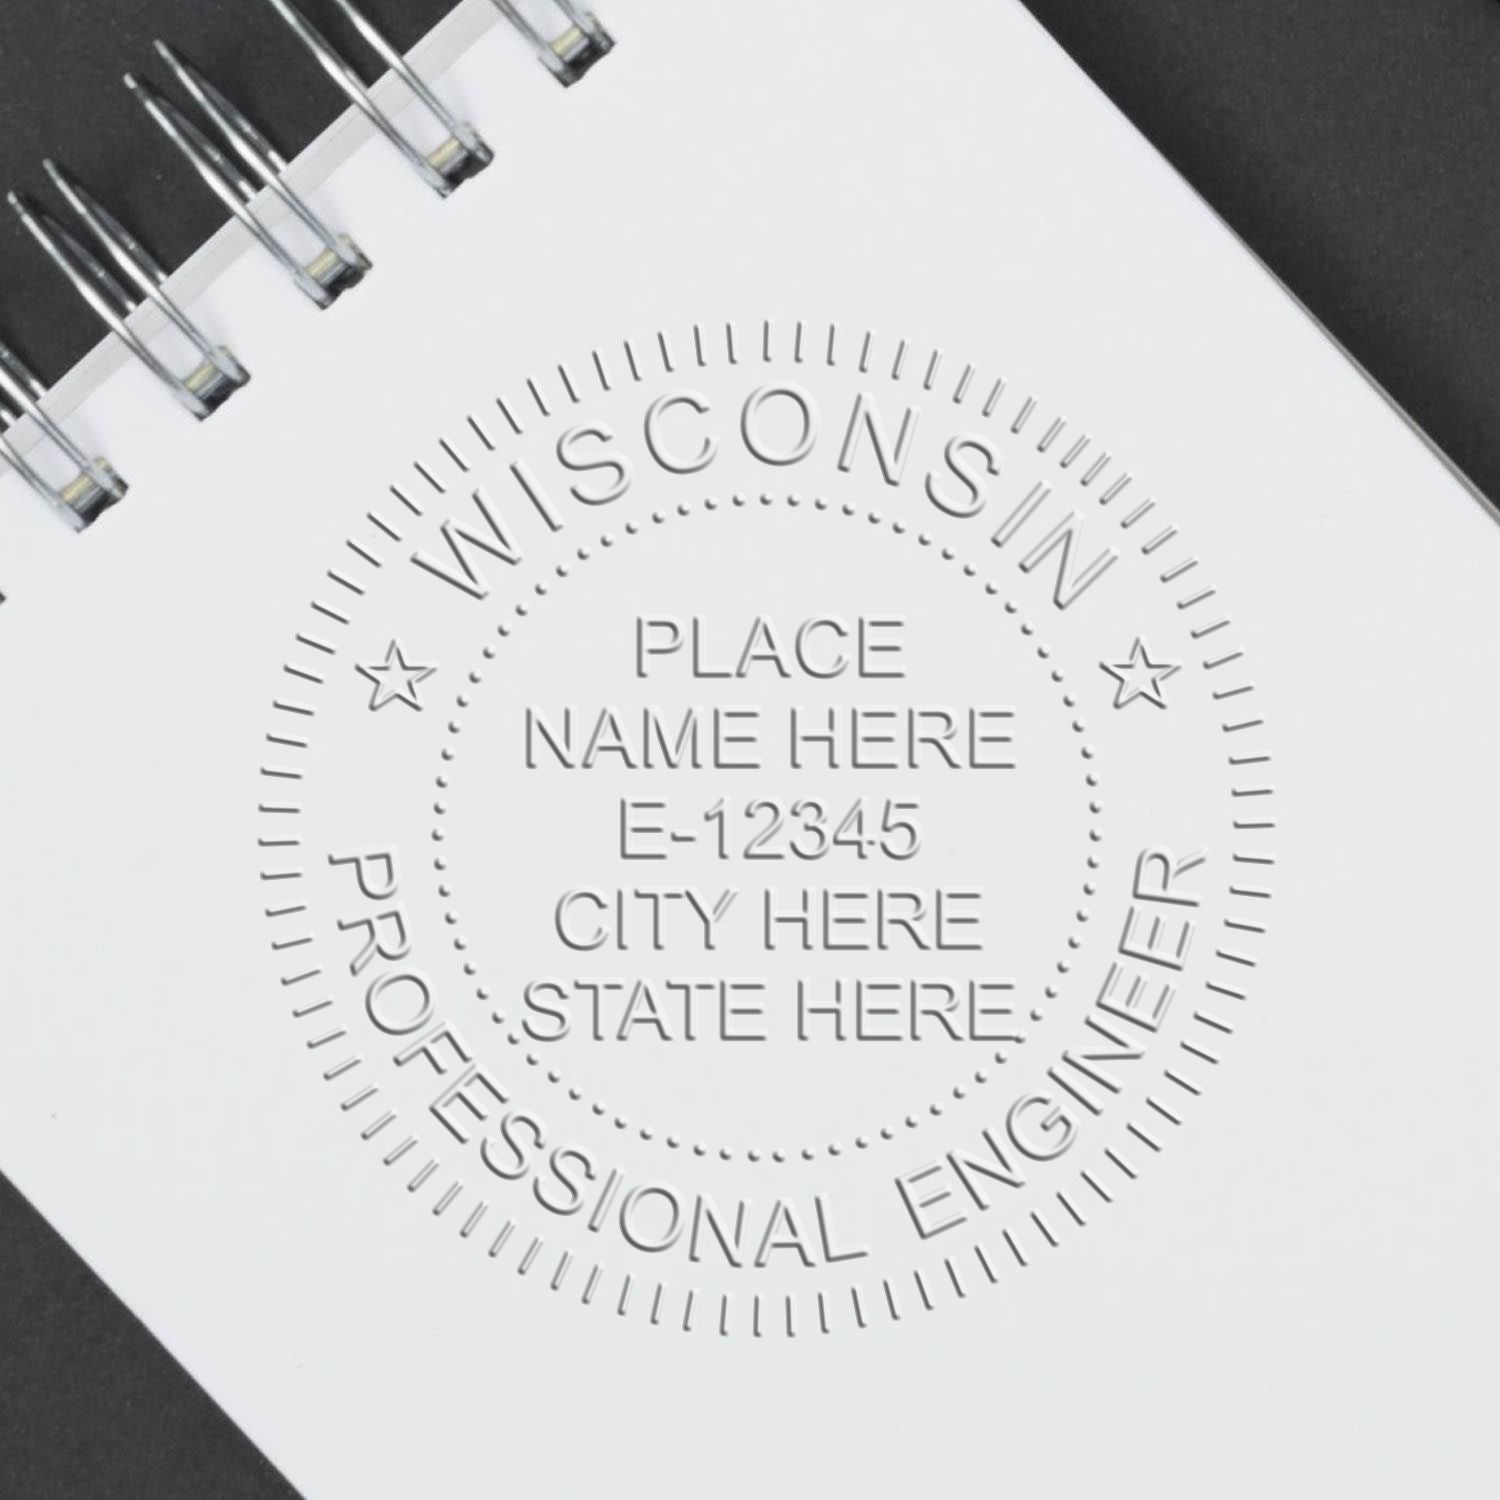 A stamped impression of the Handheld Wisconsin Professional Engineer Embosser in this stylish lifestyle photo, setting the tone for a unique and personalized product.